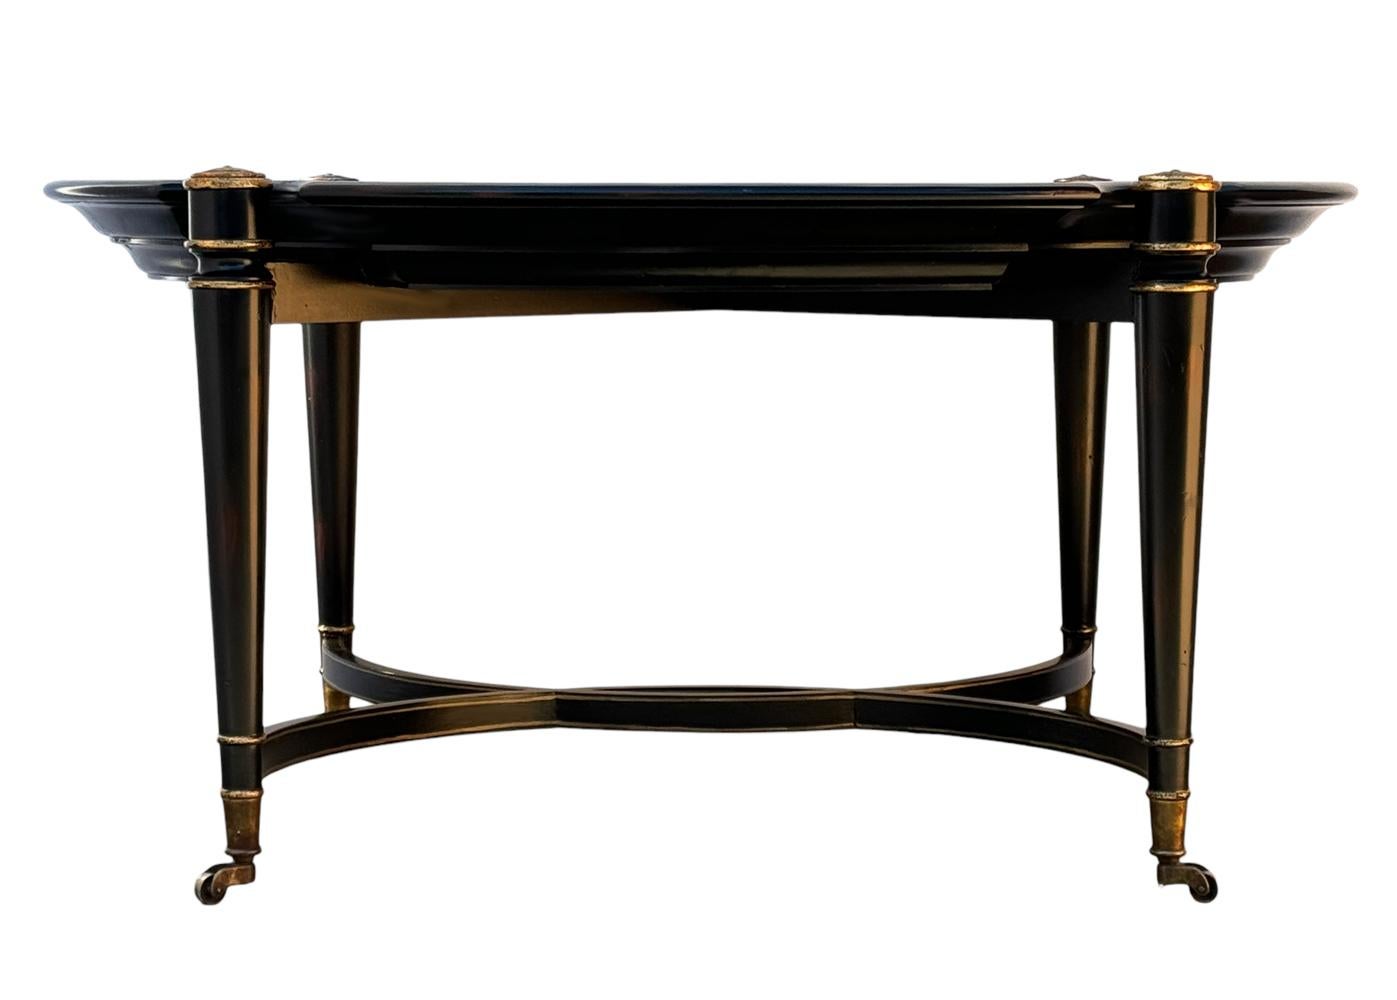 A classic & sophisticated coffee table straight out of the 1980's. It features an emire regency design with burl wood with gold trim. 